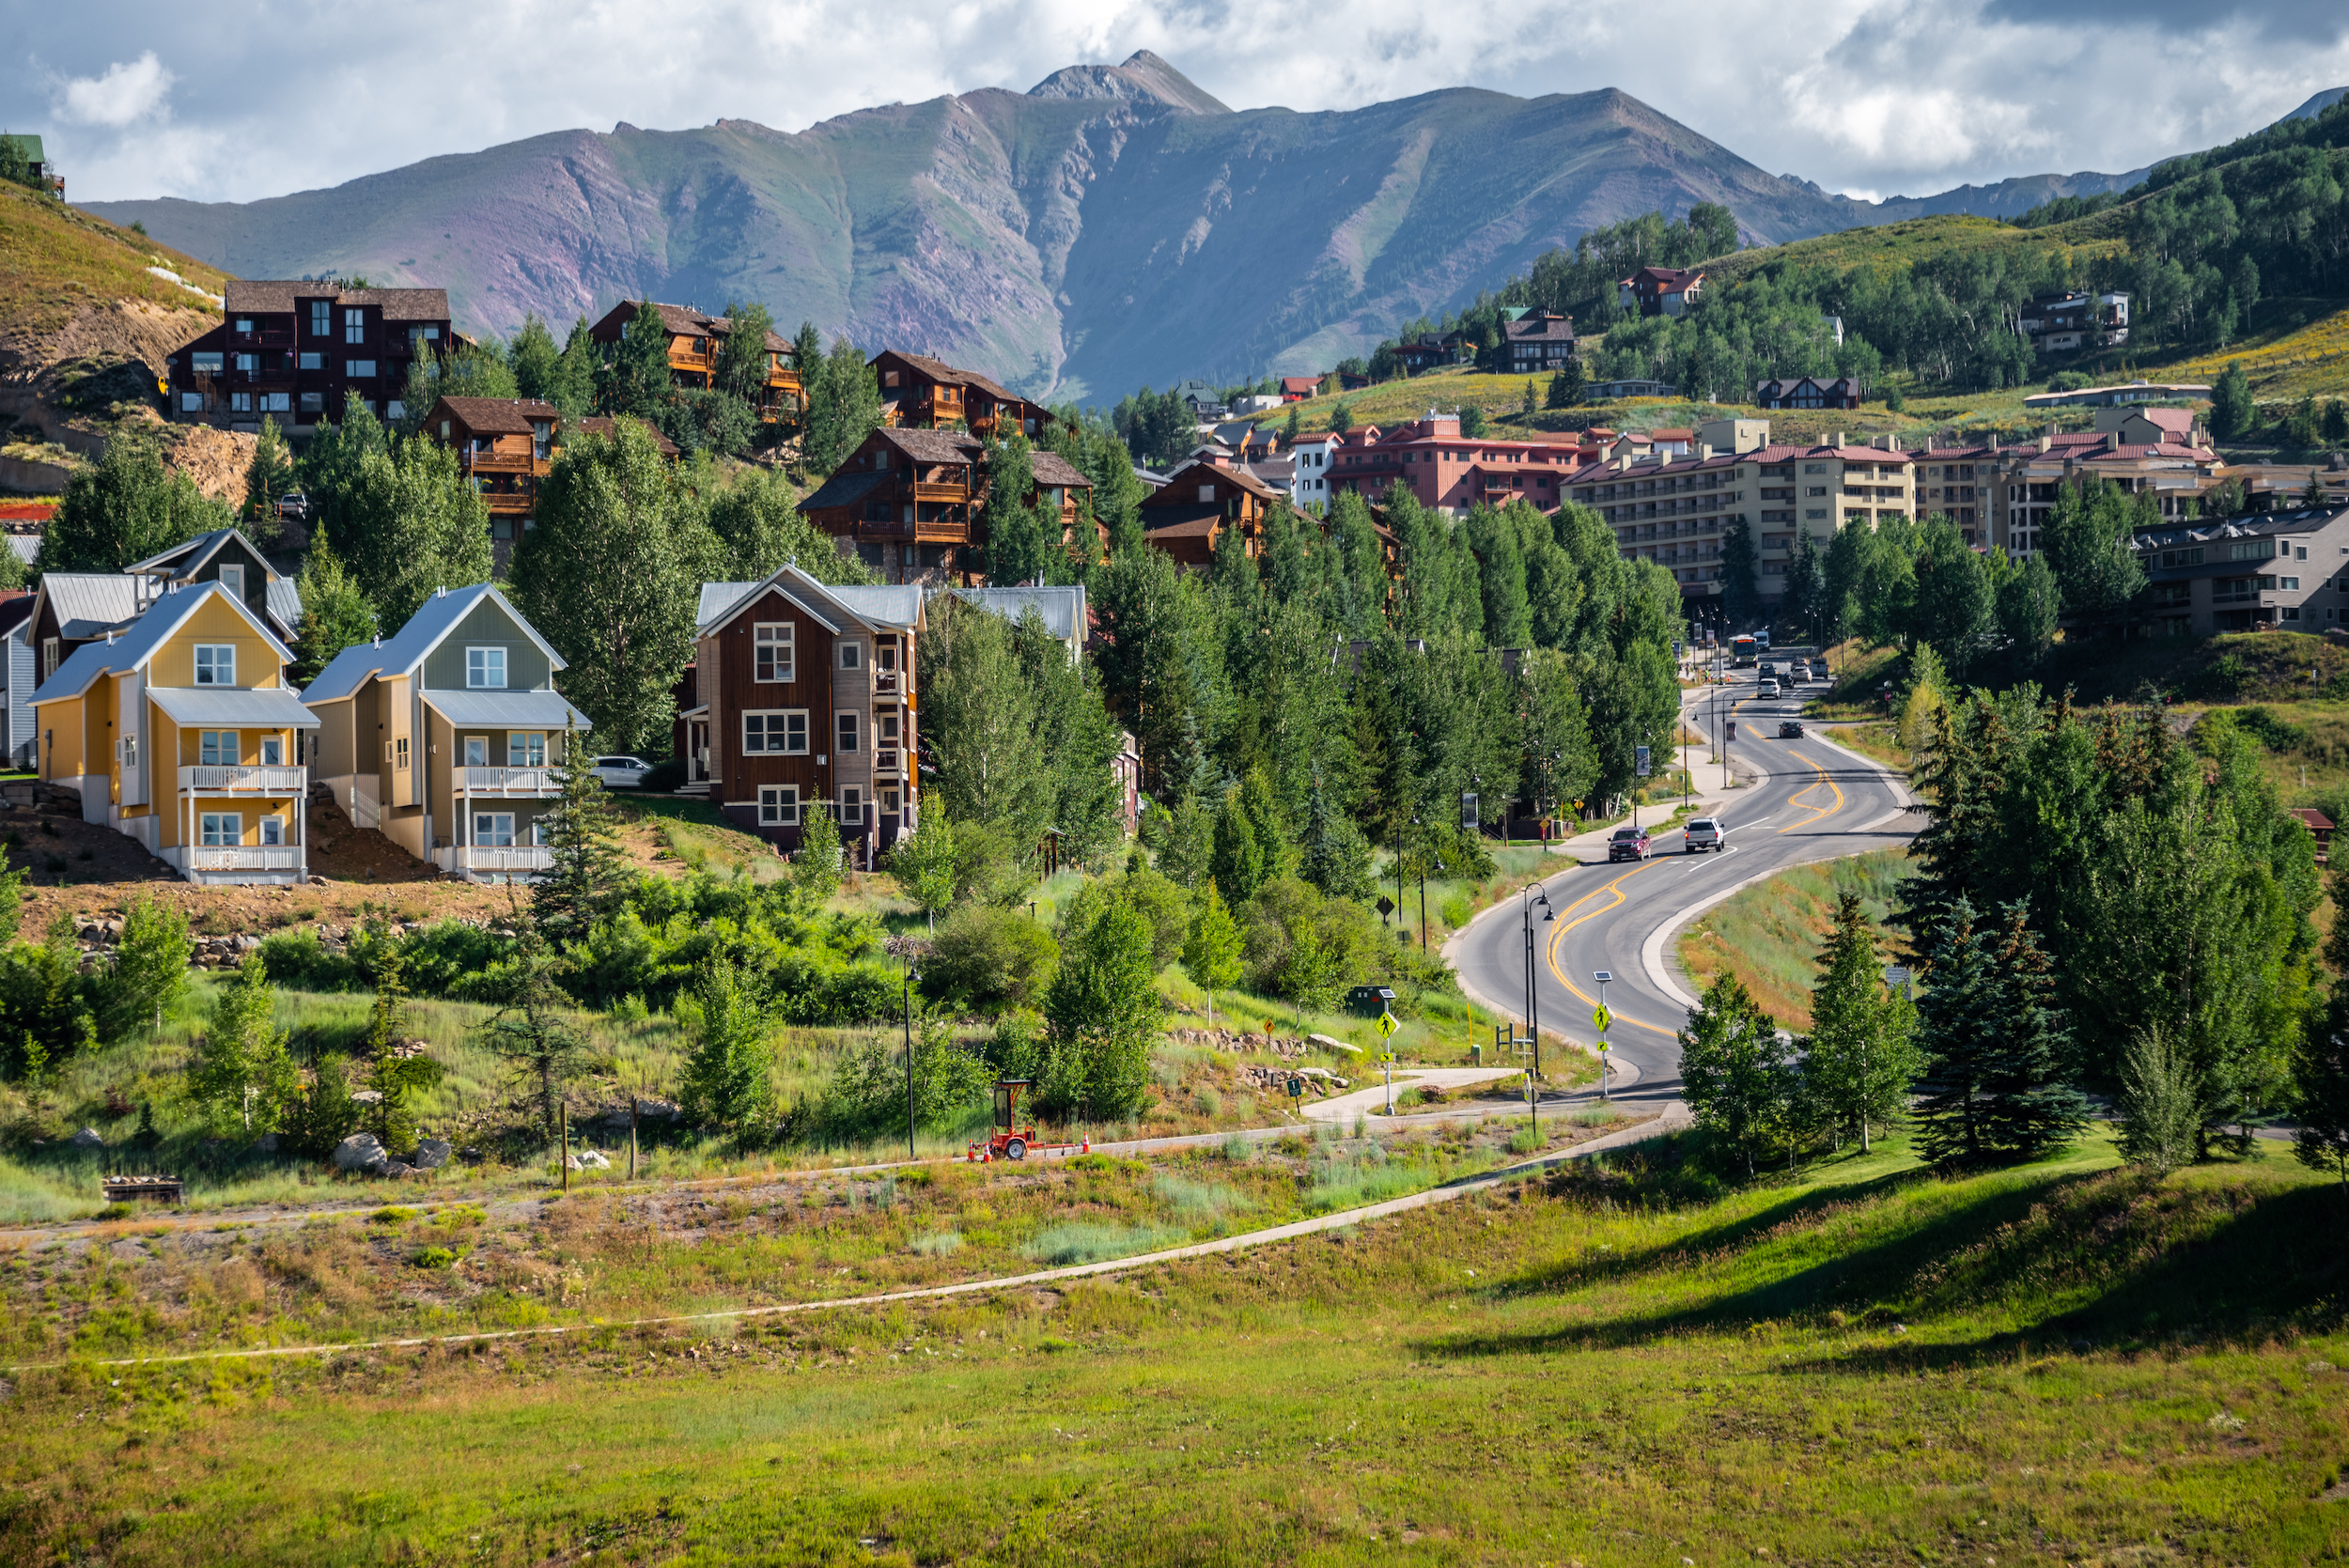 Large vacation rentals on a hillside with a mountain peak in the background. These properties are mt. crested butte lodging